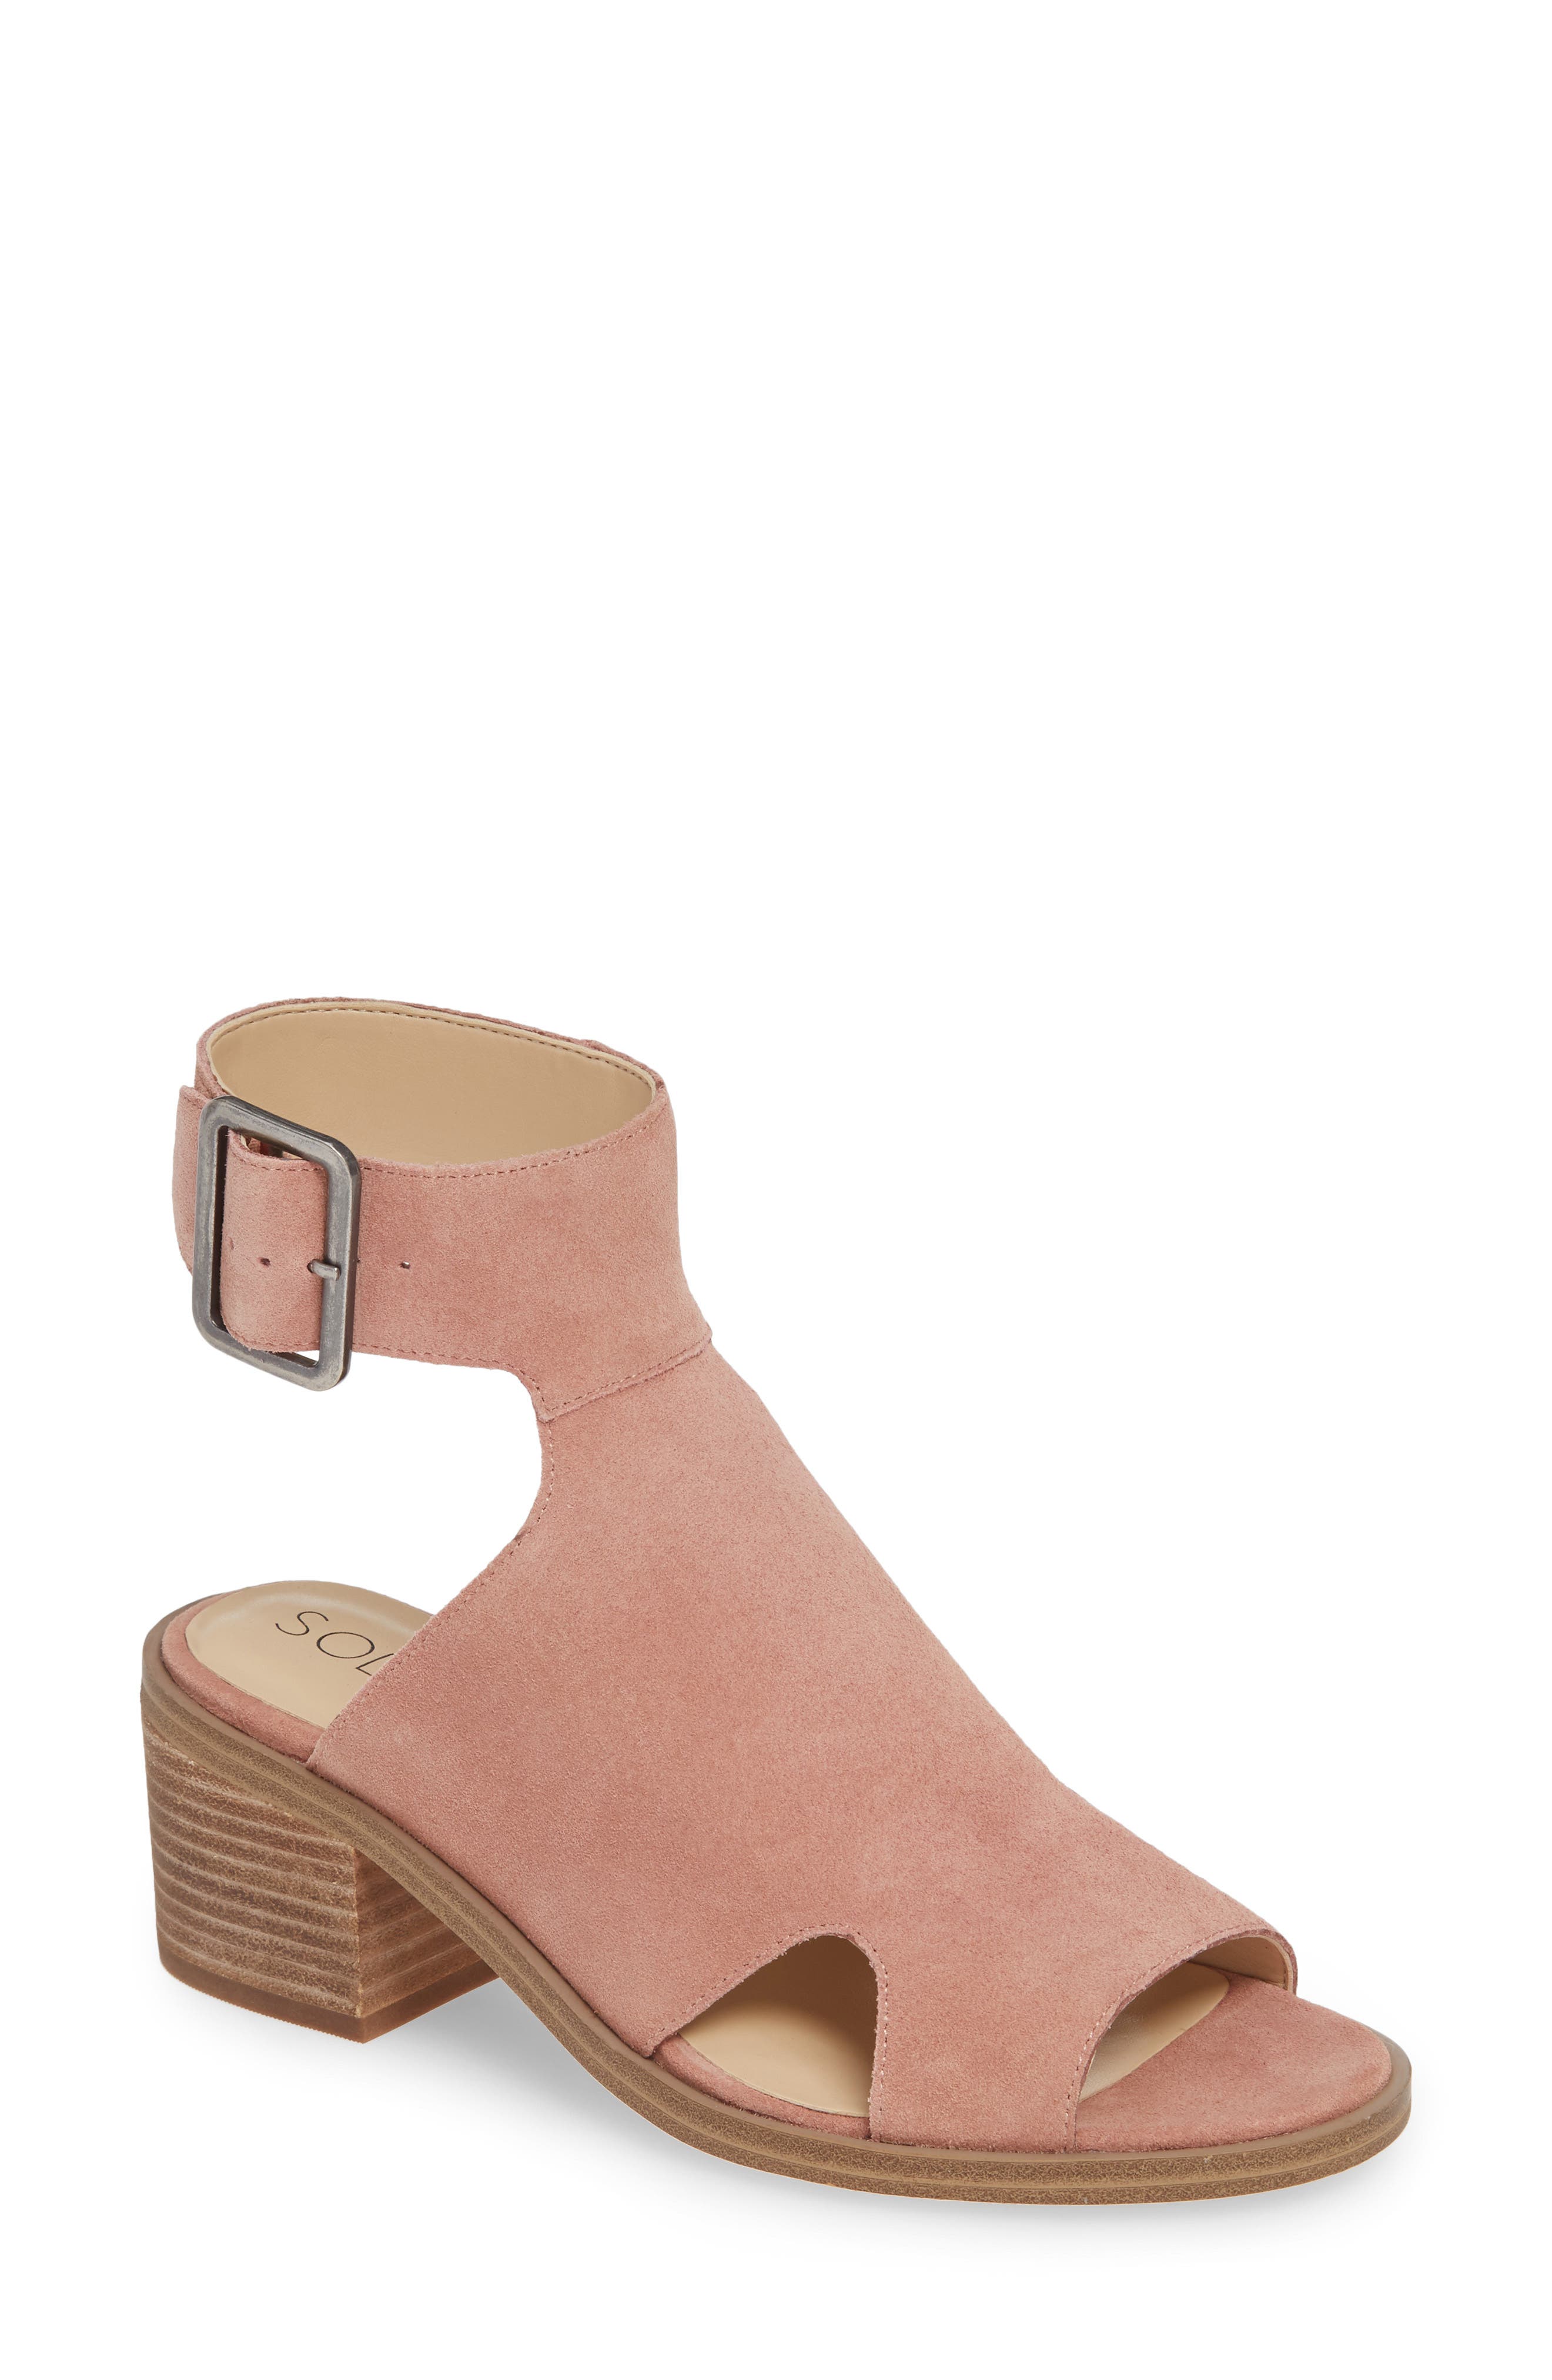 Sole Society | Tally Ankle Cuff Sandal 